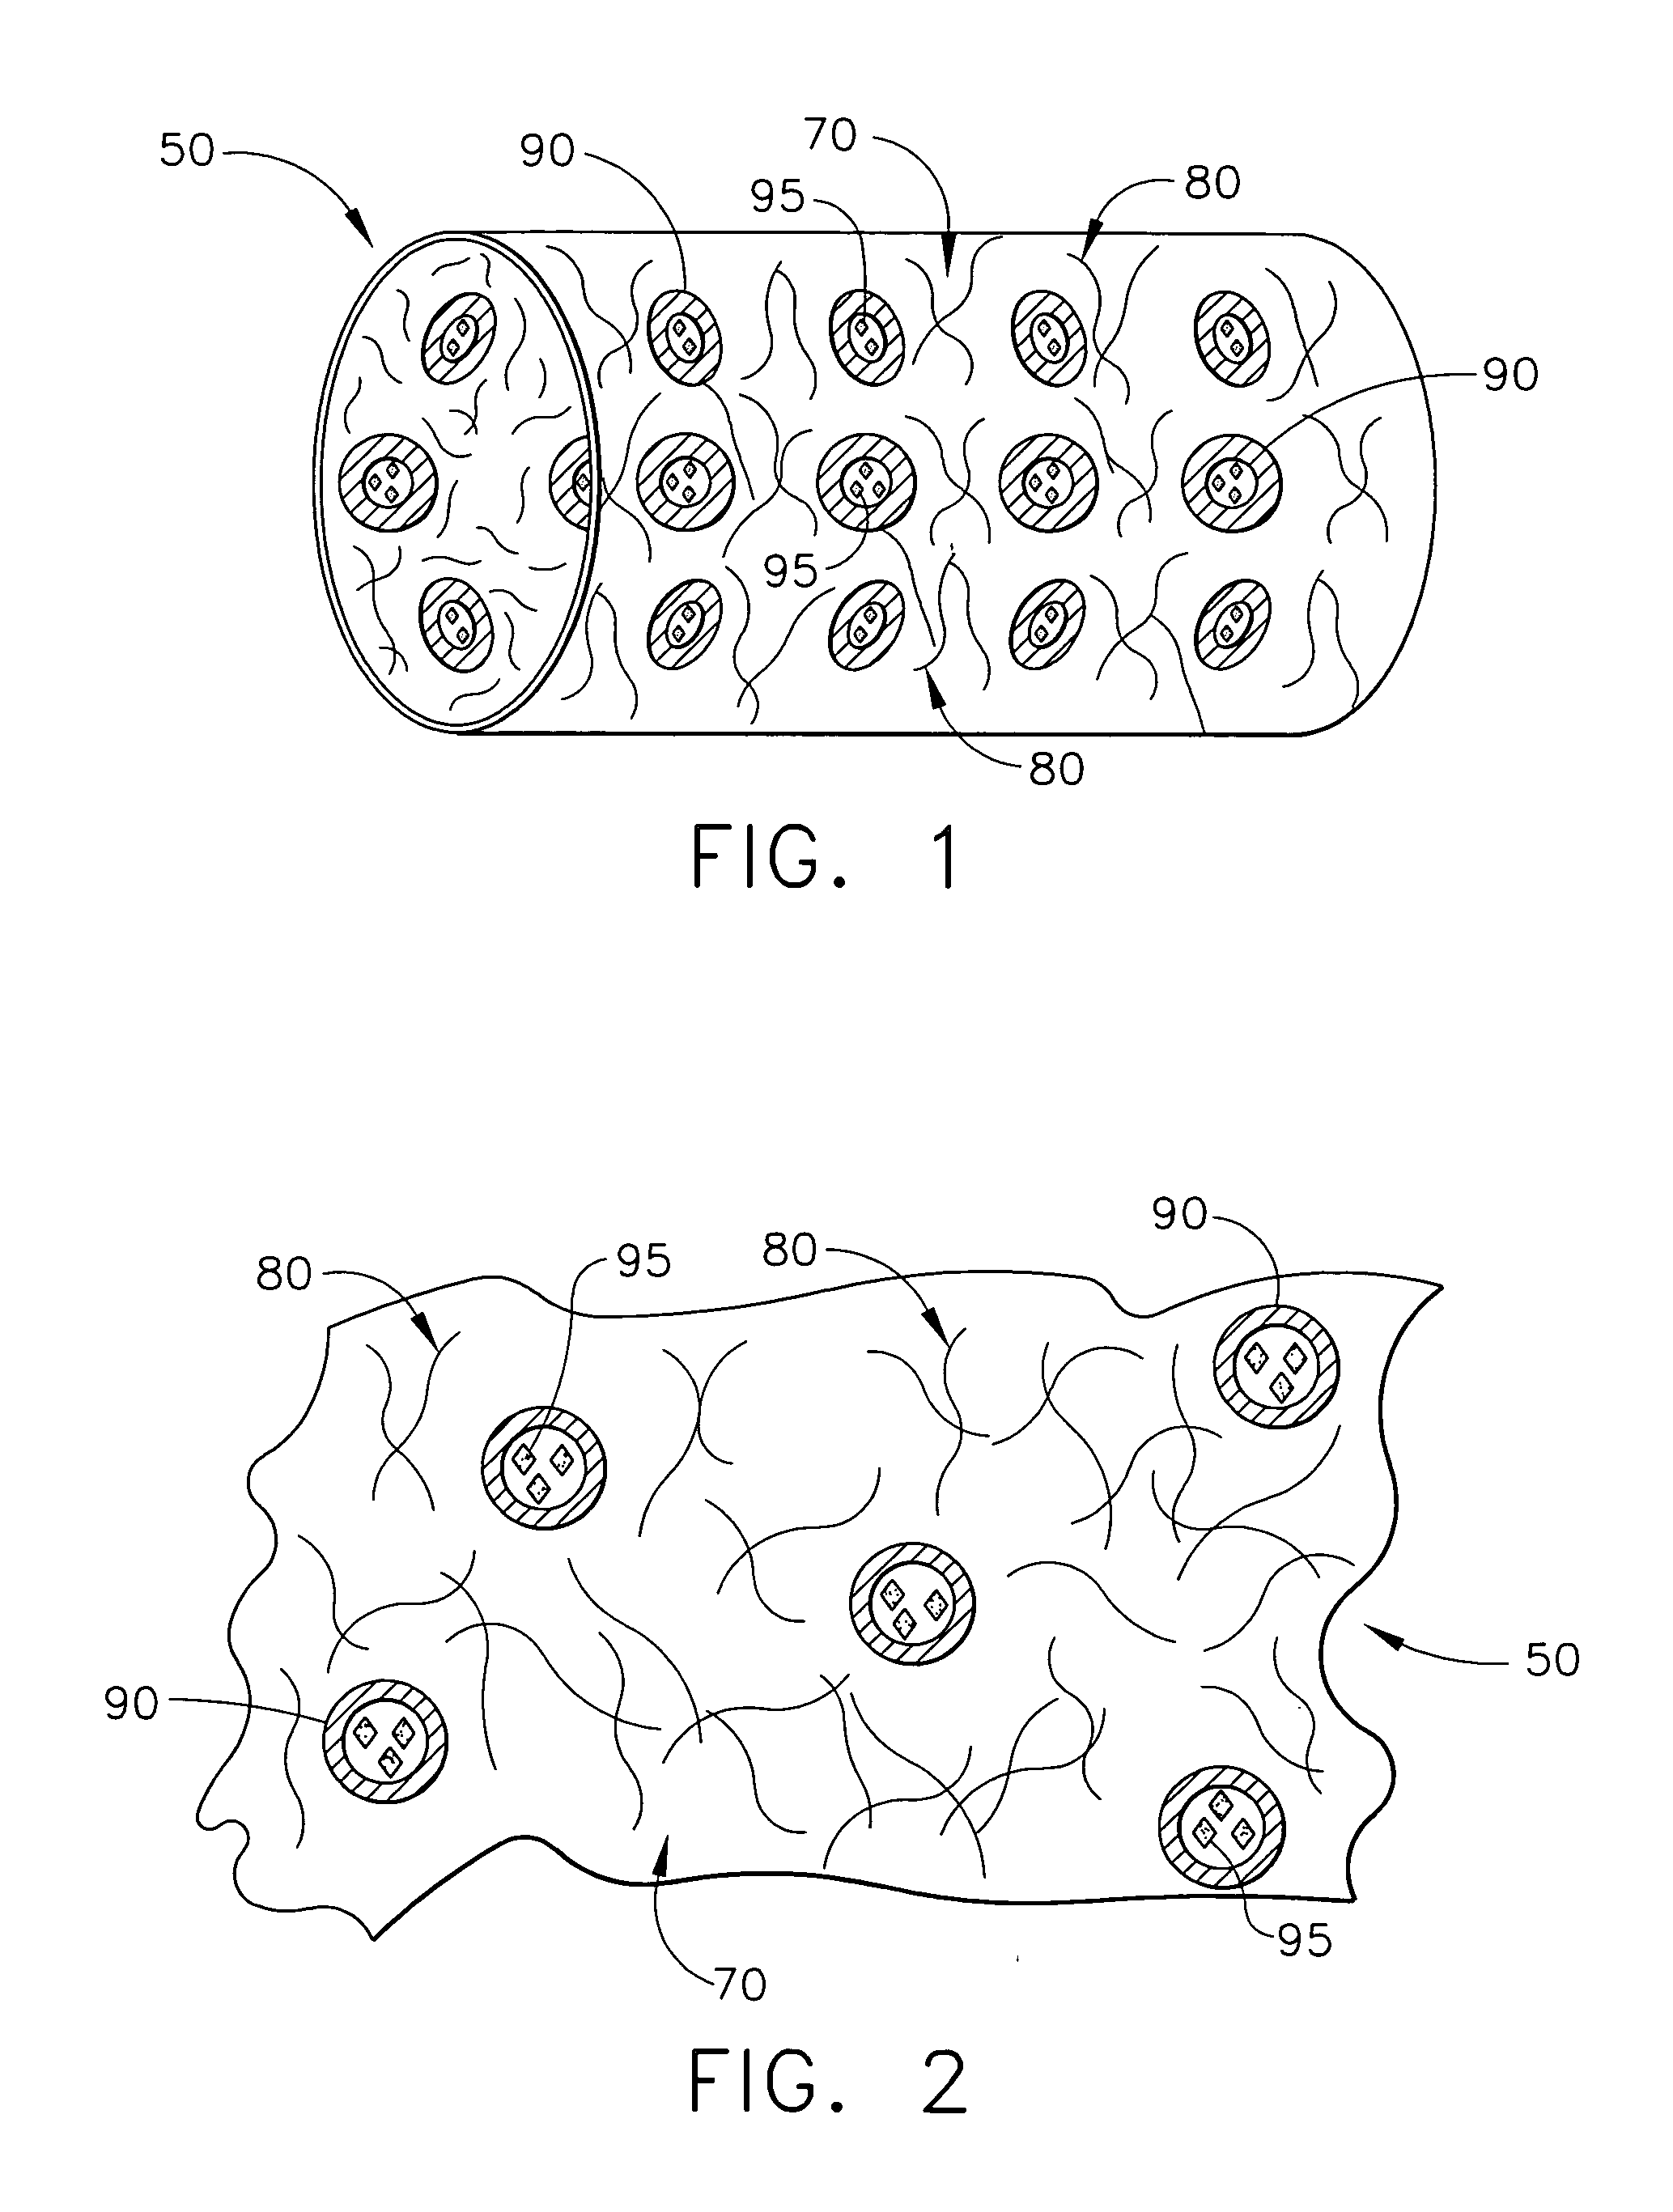 Biodegradable medical implant with encapsulated buffering agent